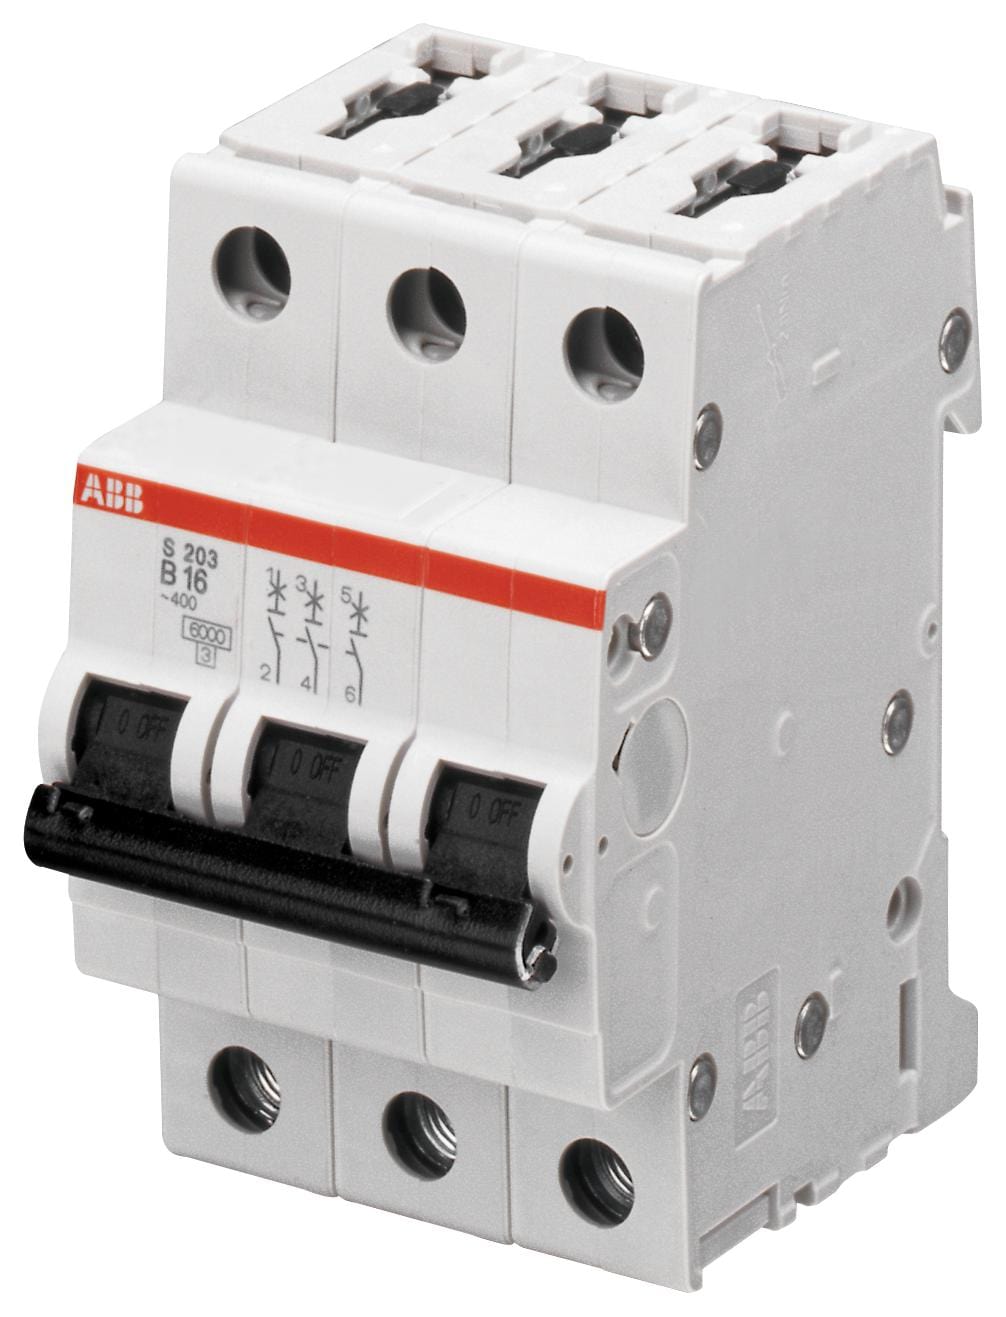 ABB Thermal Magnetic S203-D50 CIRCUIT BREAKER, THERMAL MAG, 3 POLE ABB 2492845 S203-D50